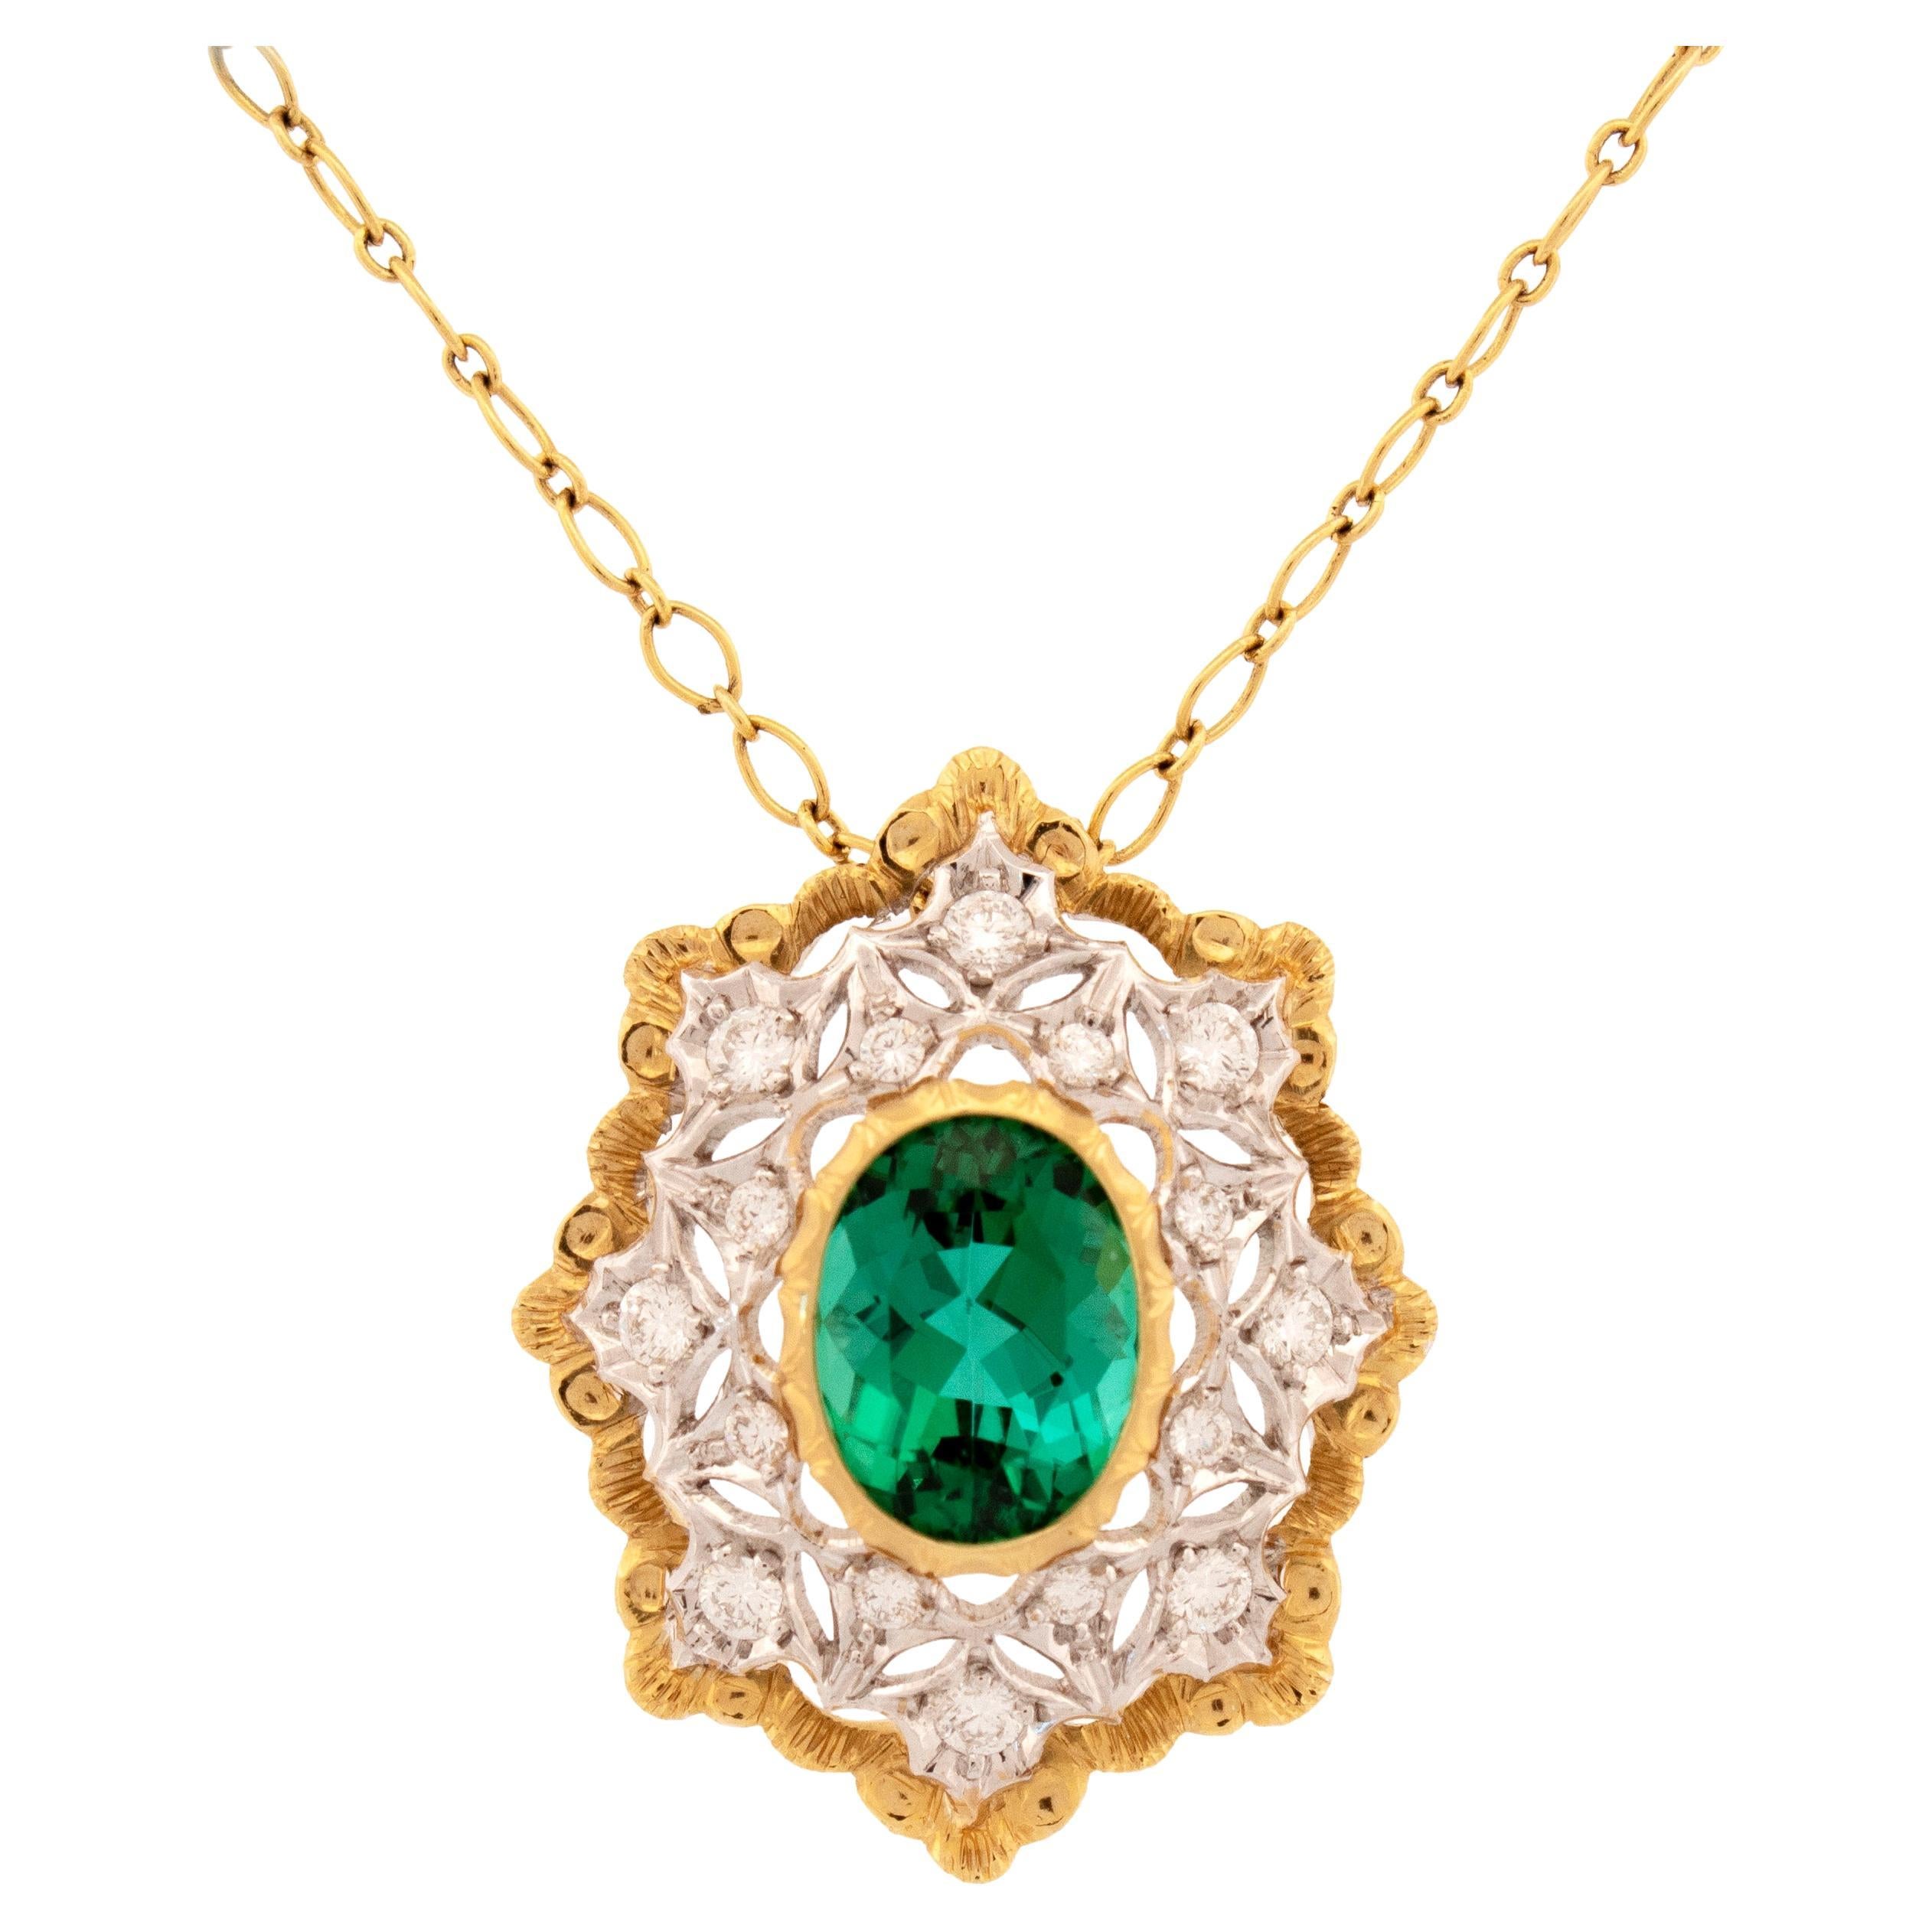 4.30ct Green Tourmaline and 18kt Gold Necklace, Made in Italy by Cynthia Scott